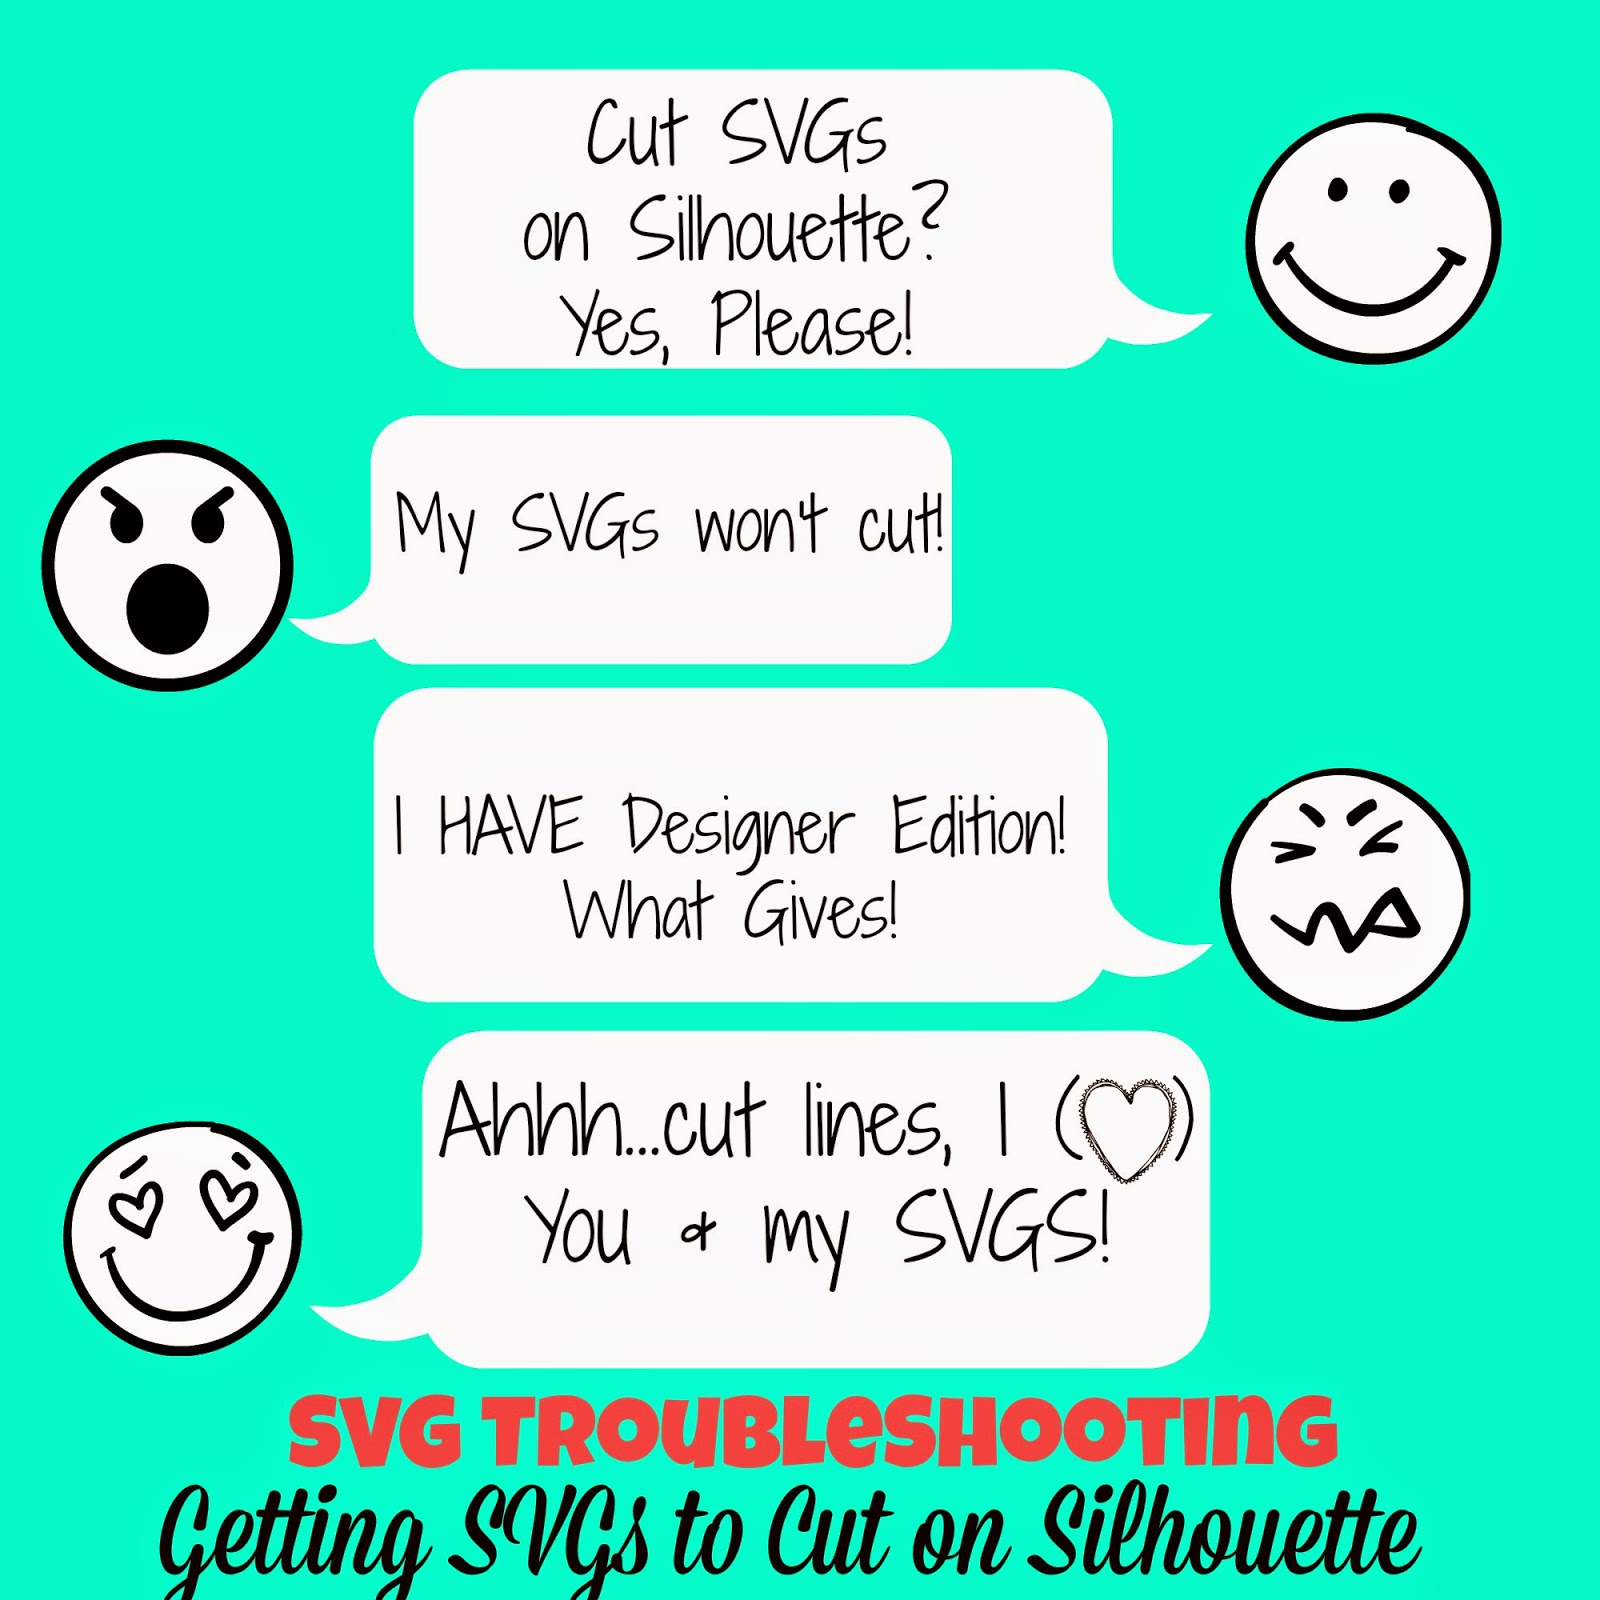 Download Svgs Troubleshooting Svg Files Won T Cut On Silhouette And I Have Designer Edition Silhouette School